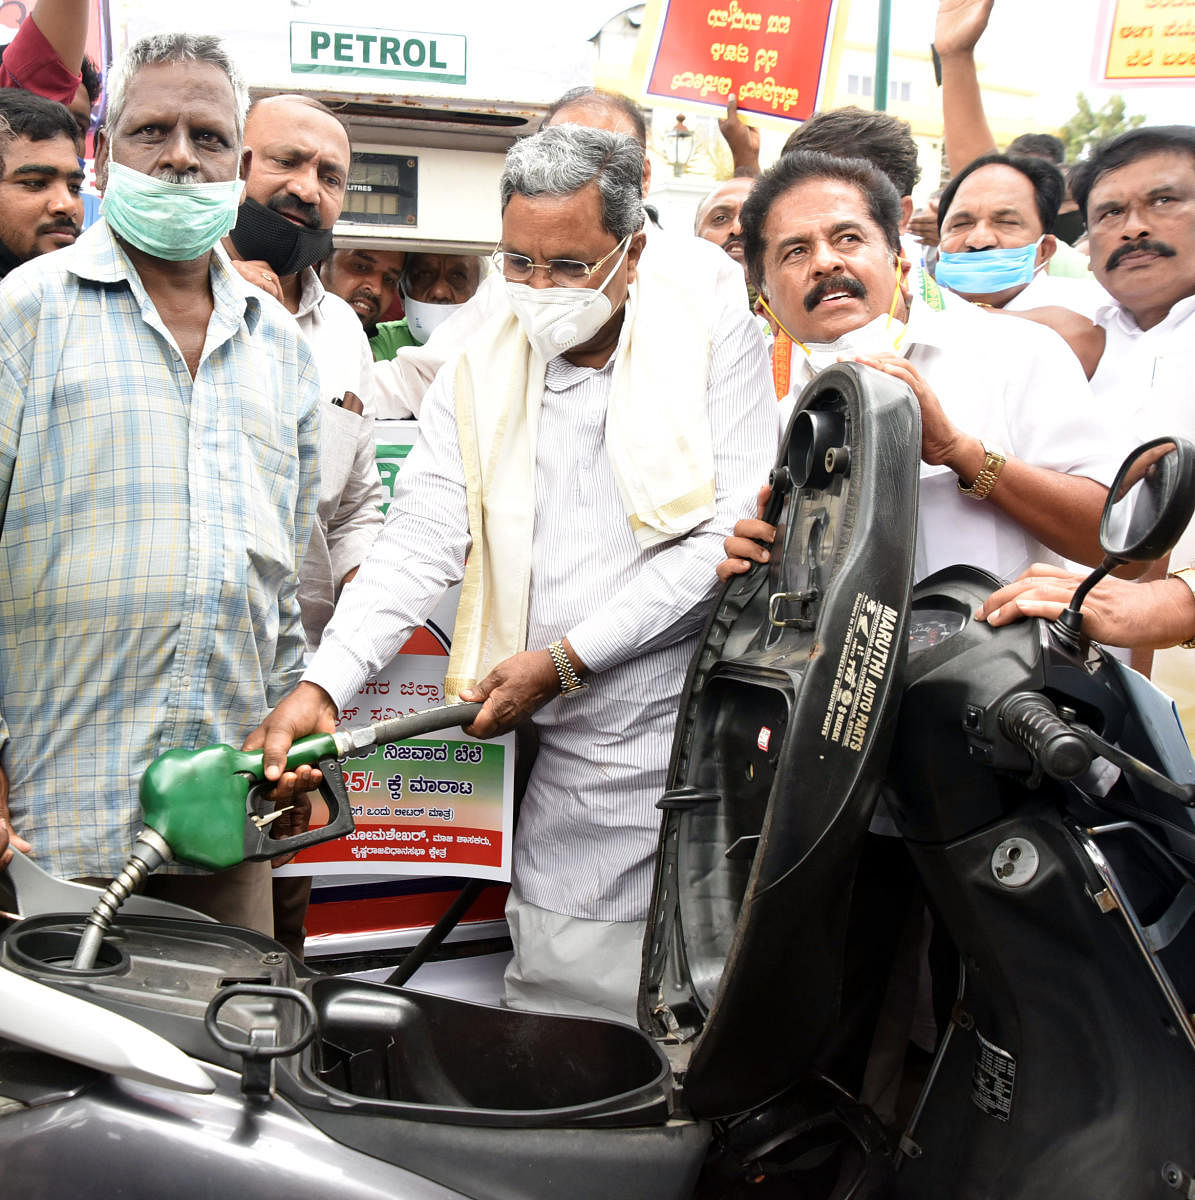 Former chief minister Siddaramaiah fills petrol in a two-wheeler during a protest at Chikkammaniketana Marriage Hall in Mysuru on Friday. Ex-MLA M K Somashekar is seen. DH PHOTO